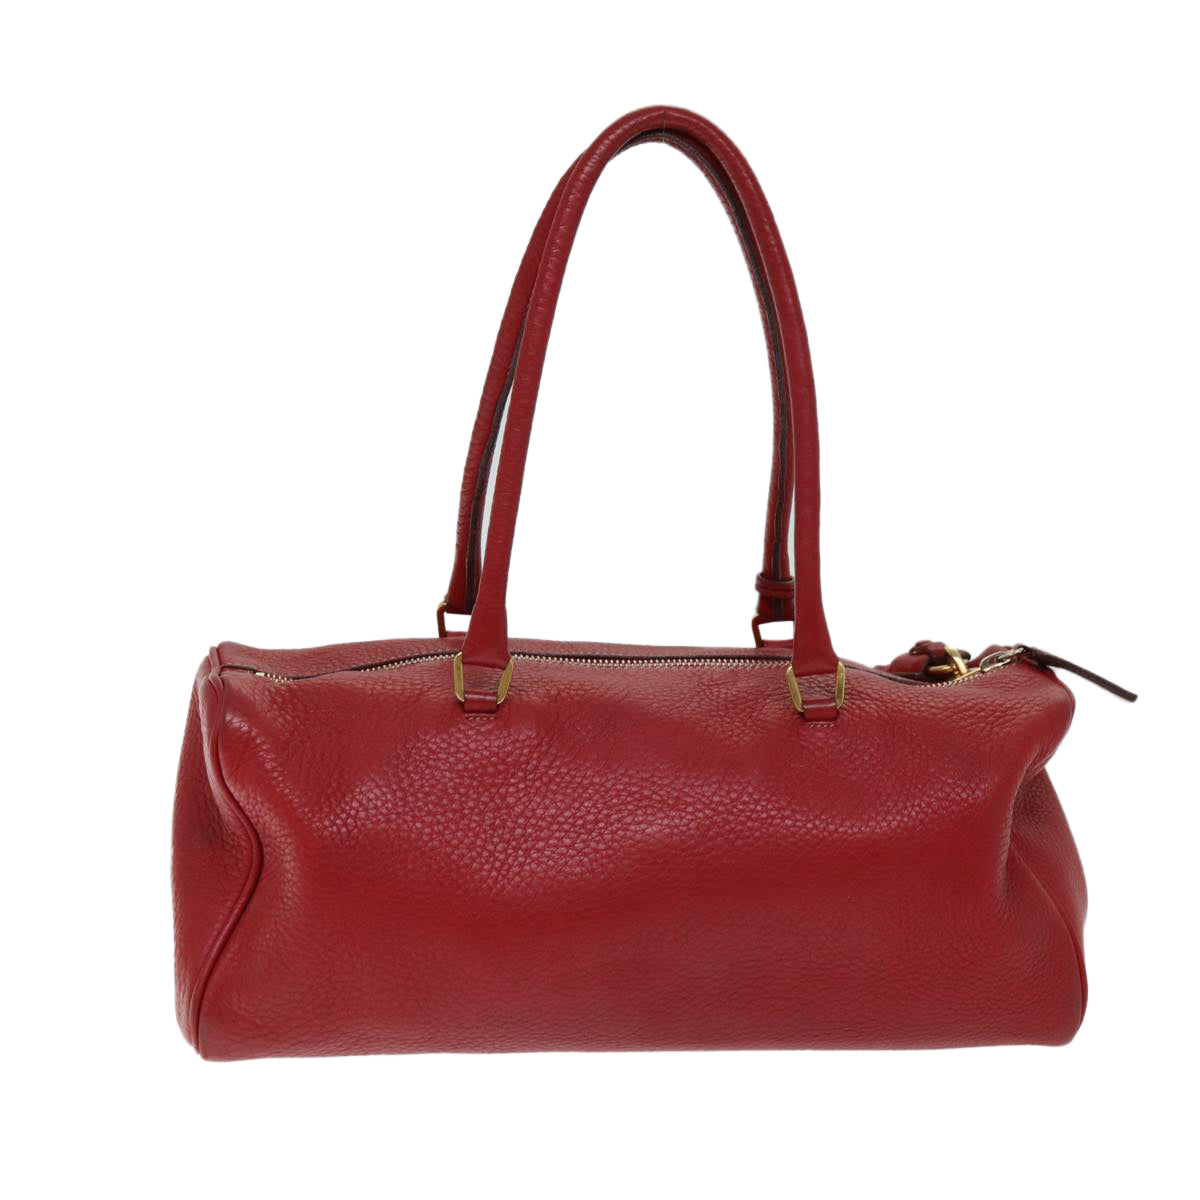 PRADA Hand Bag Leather Red Auth 74630 - 0